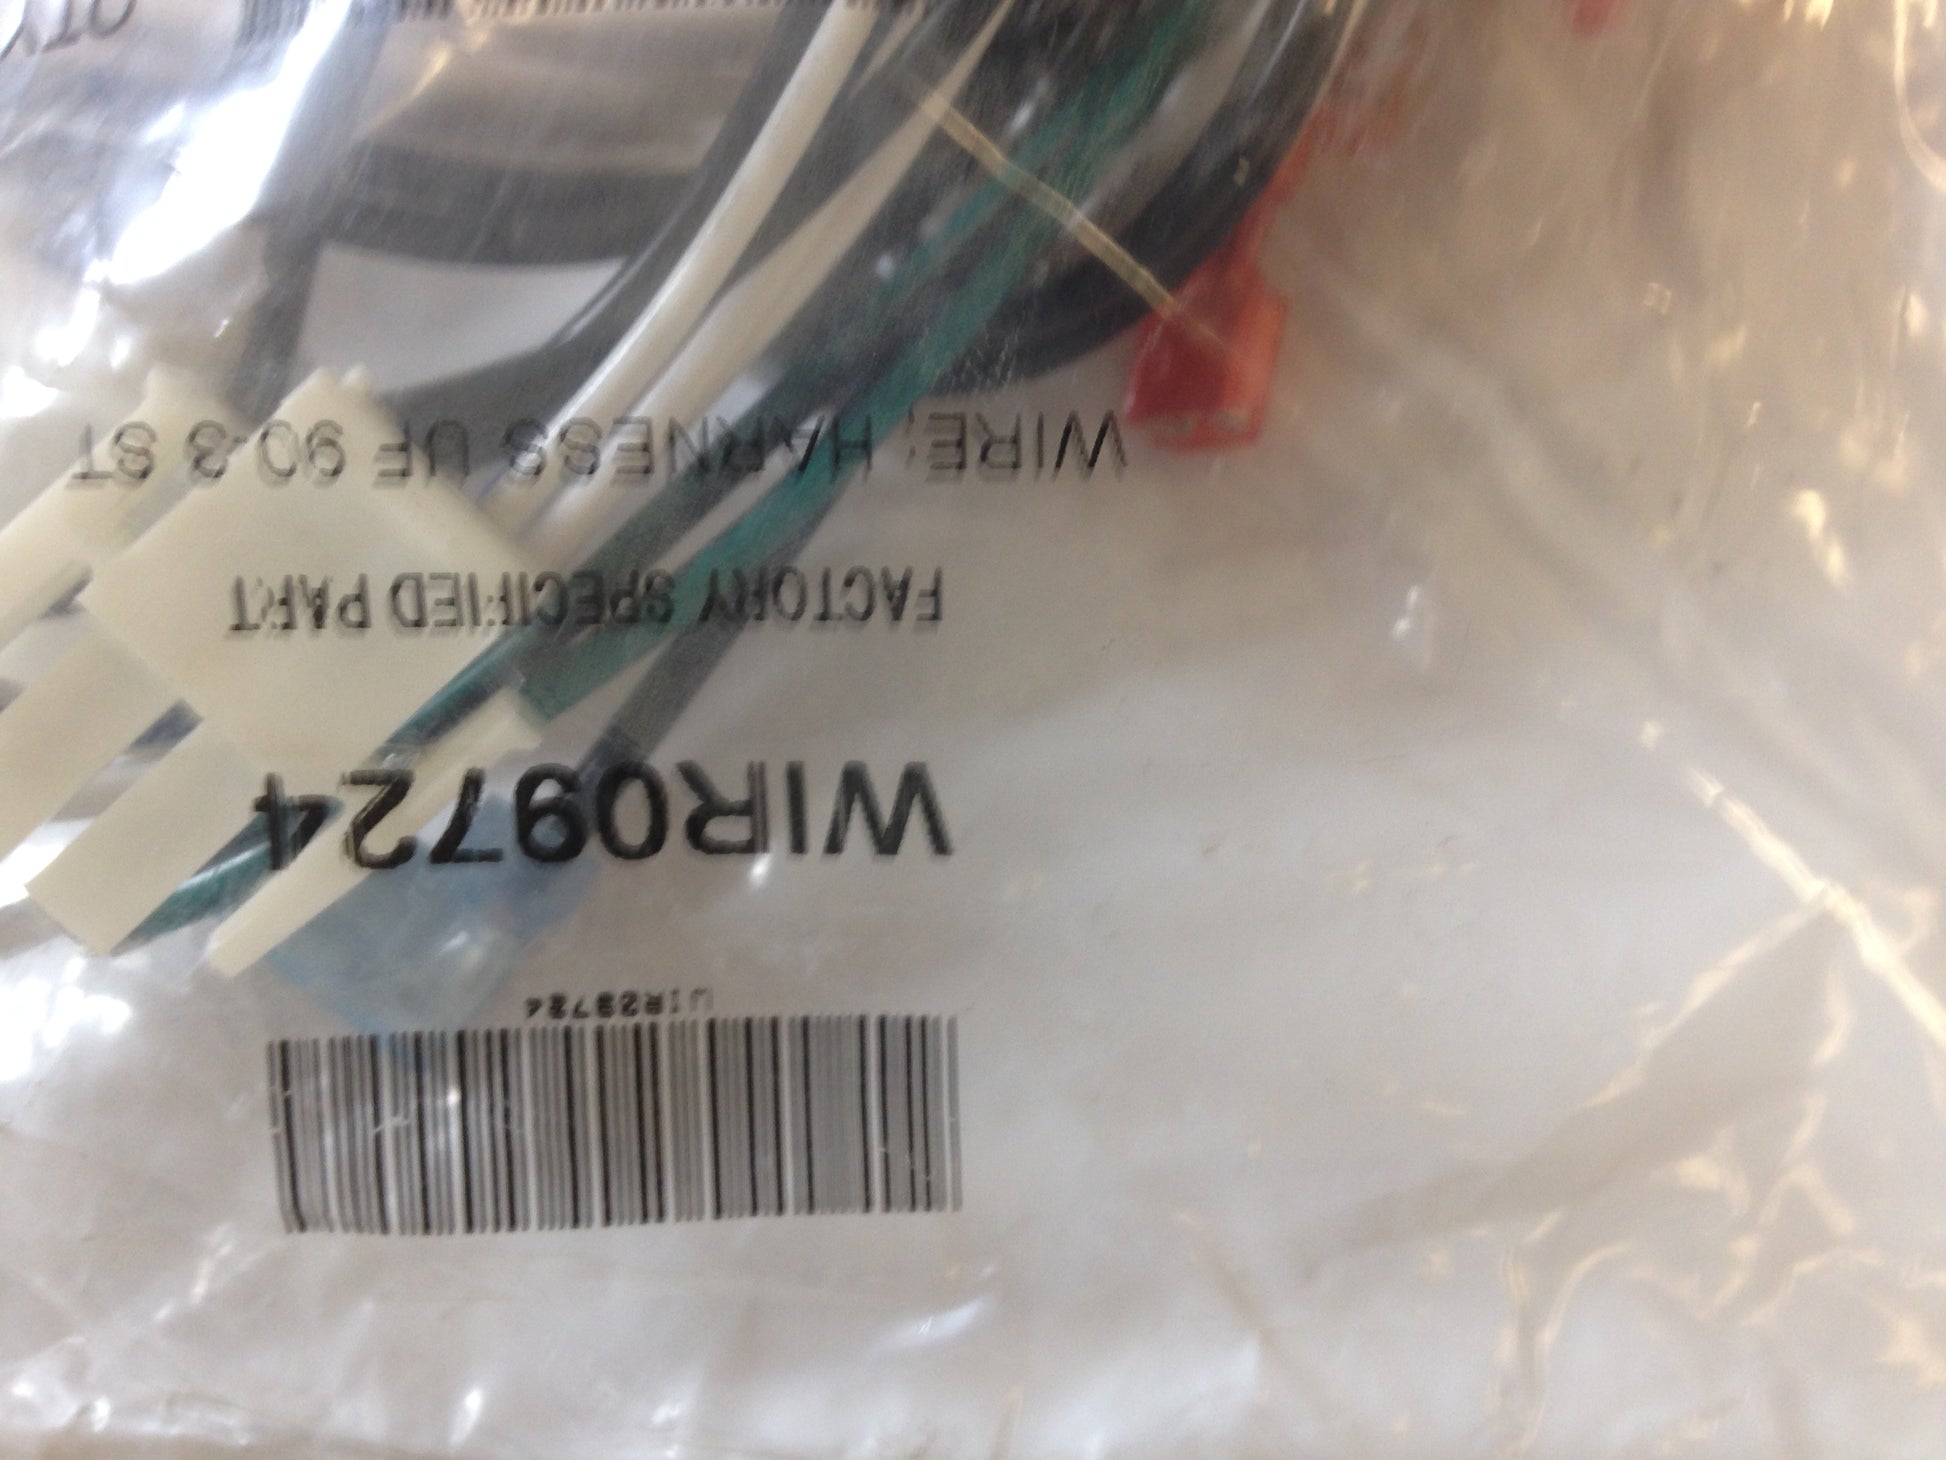 WIRE; HARNESS UF 90-3 ST